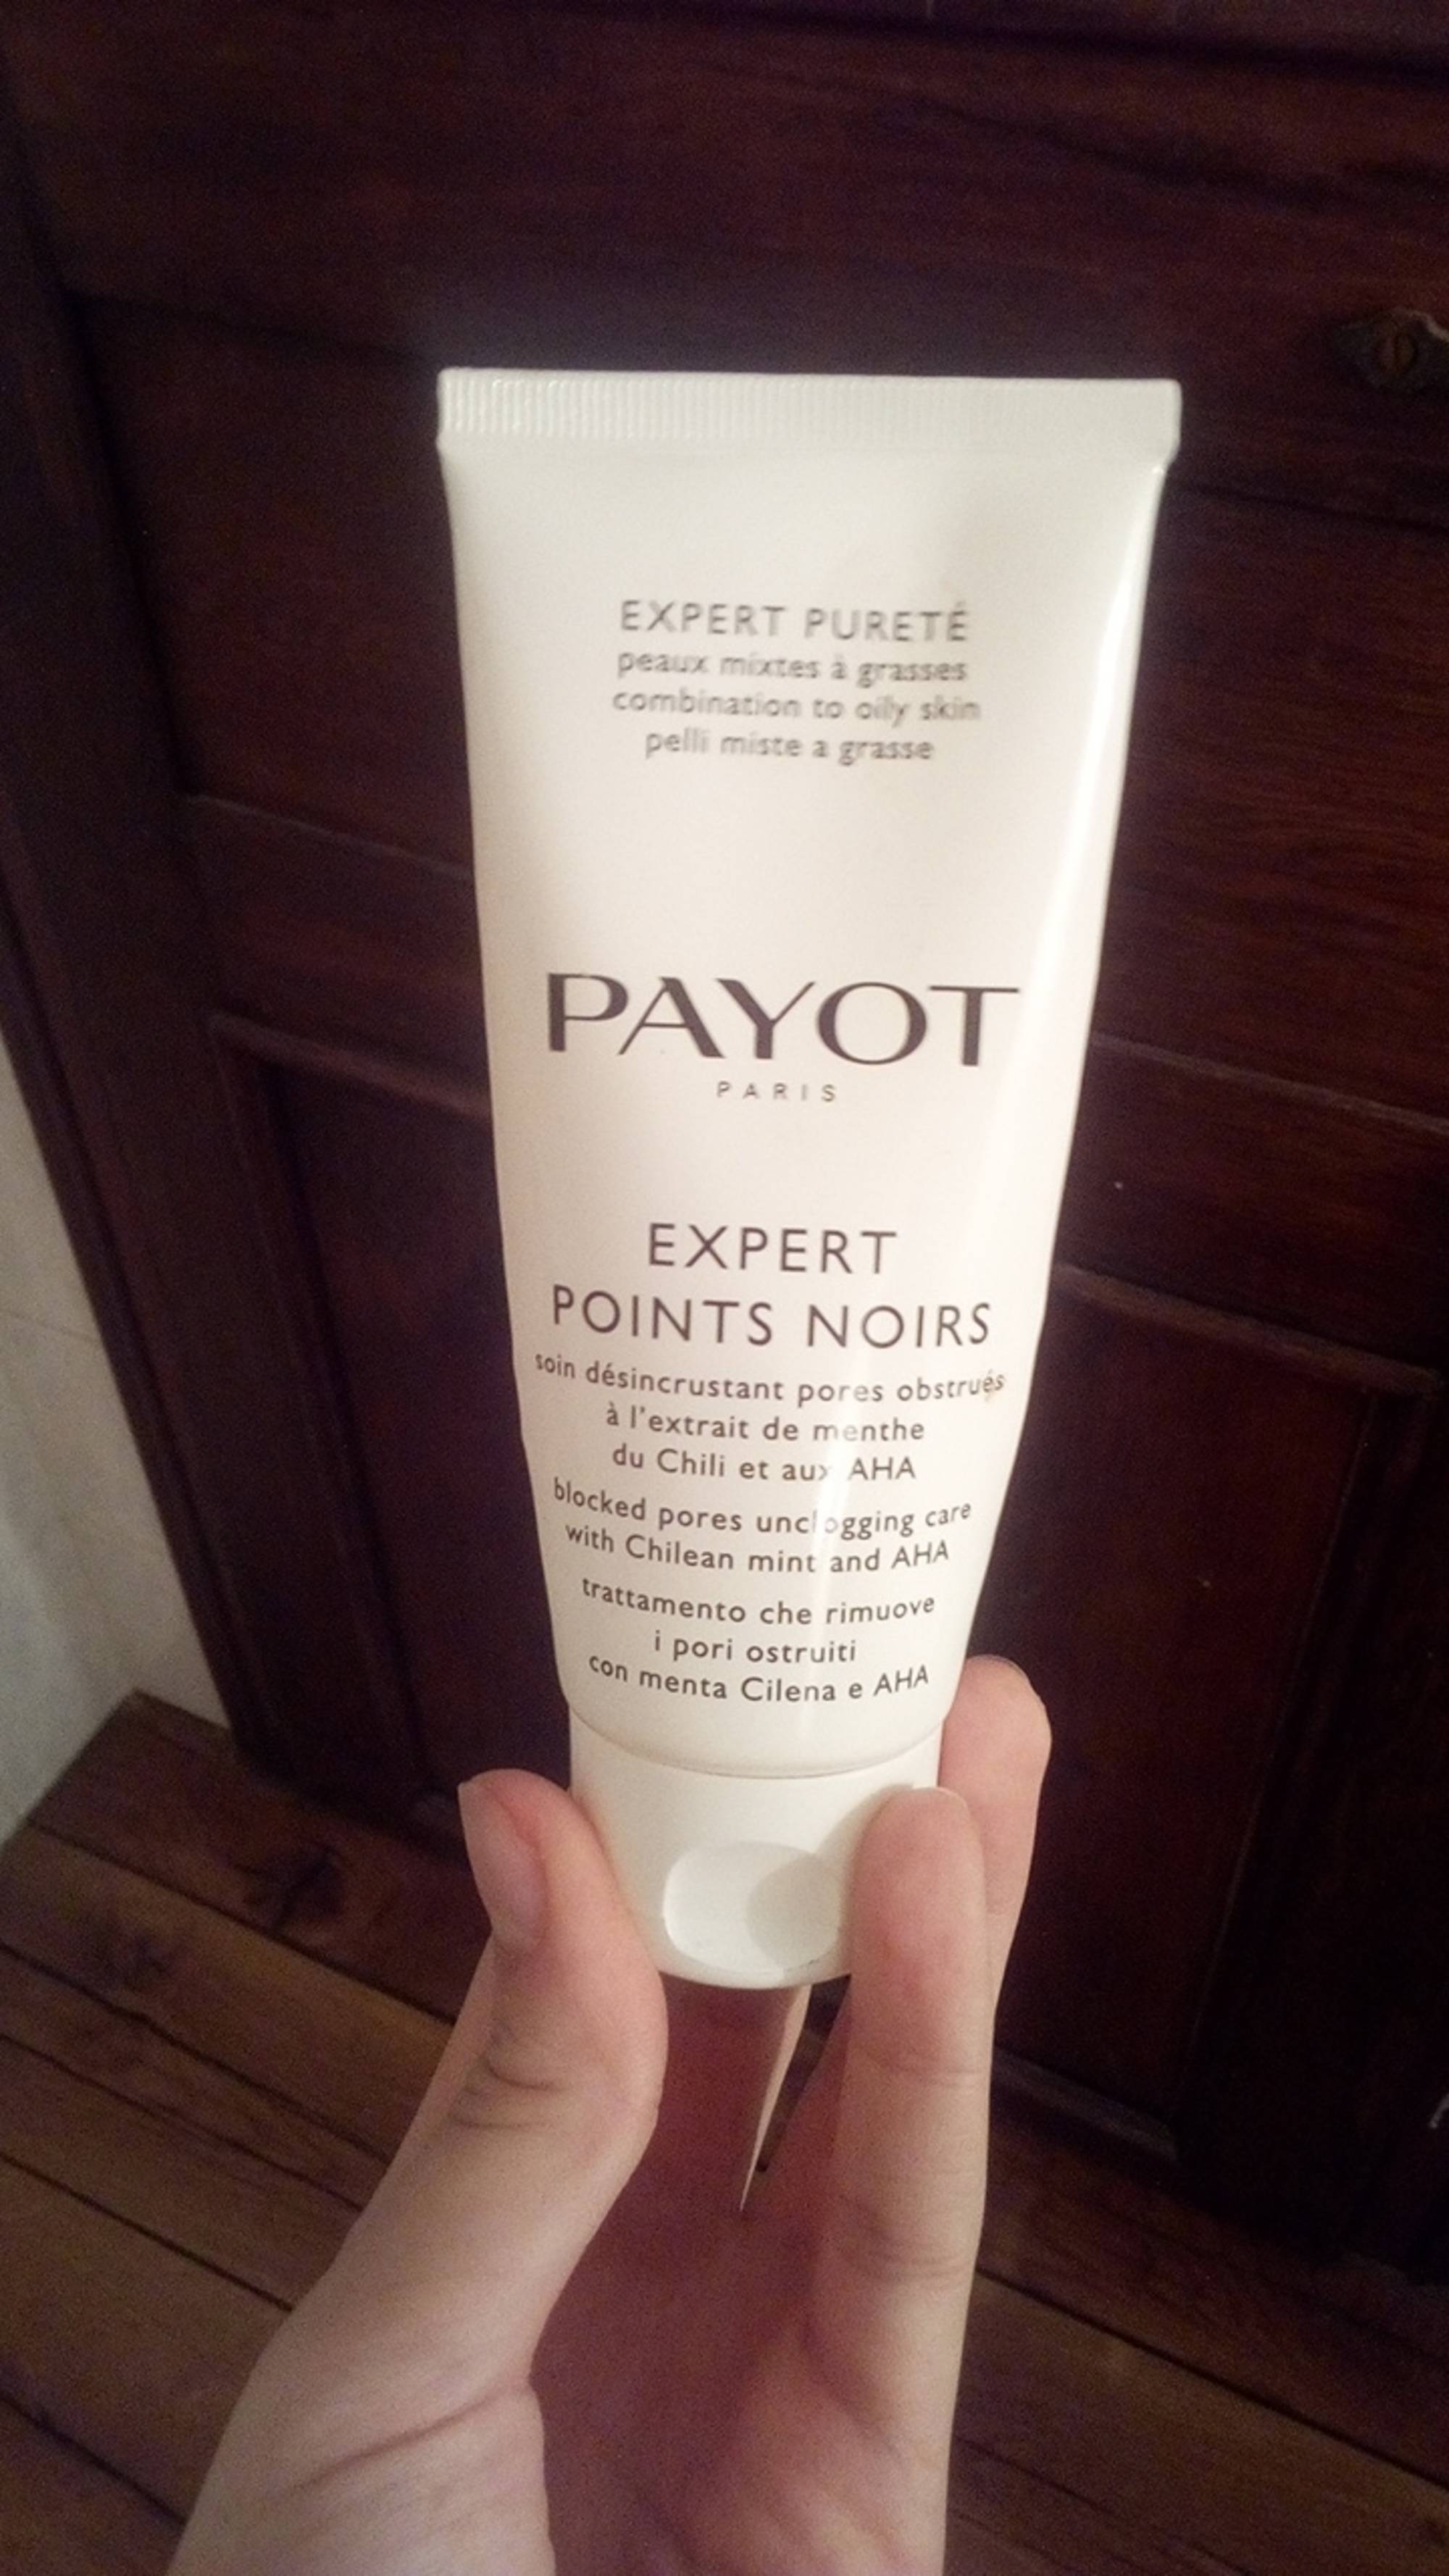 PAYOT - Expert points noirs 